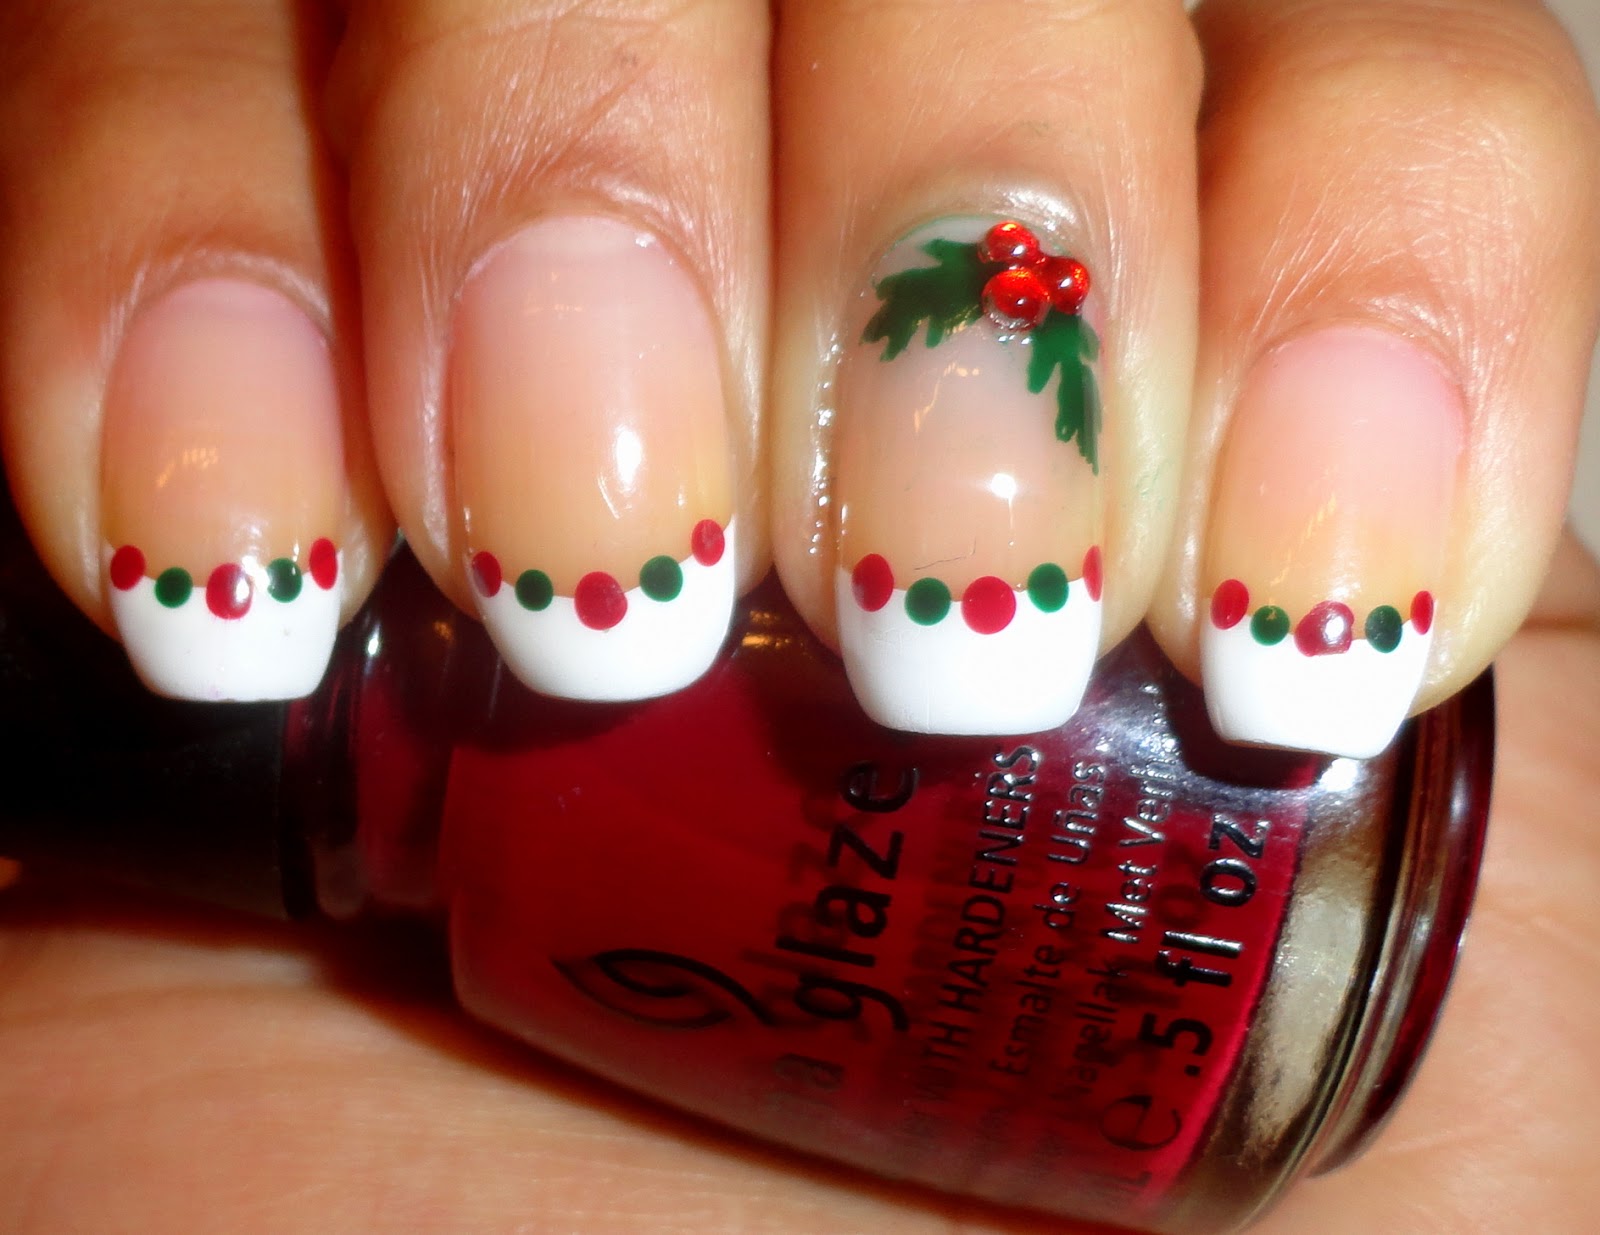 1. Christmas Holly Nail Art Designs - wide 2